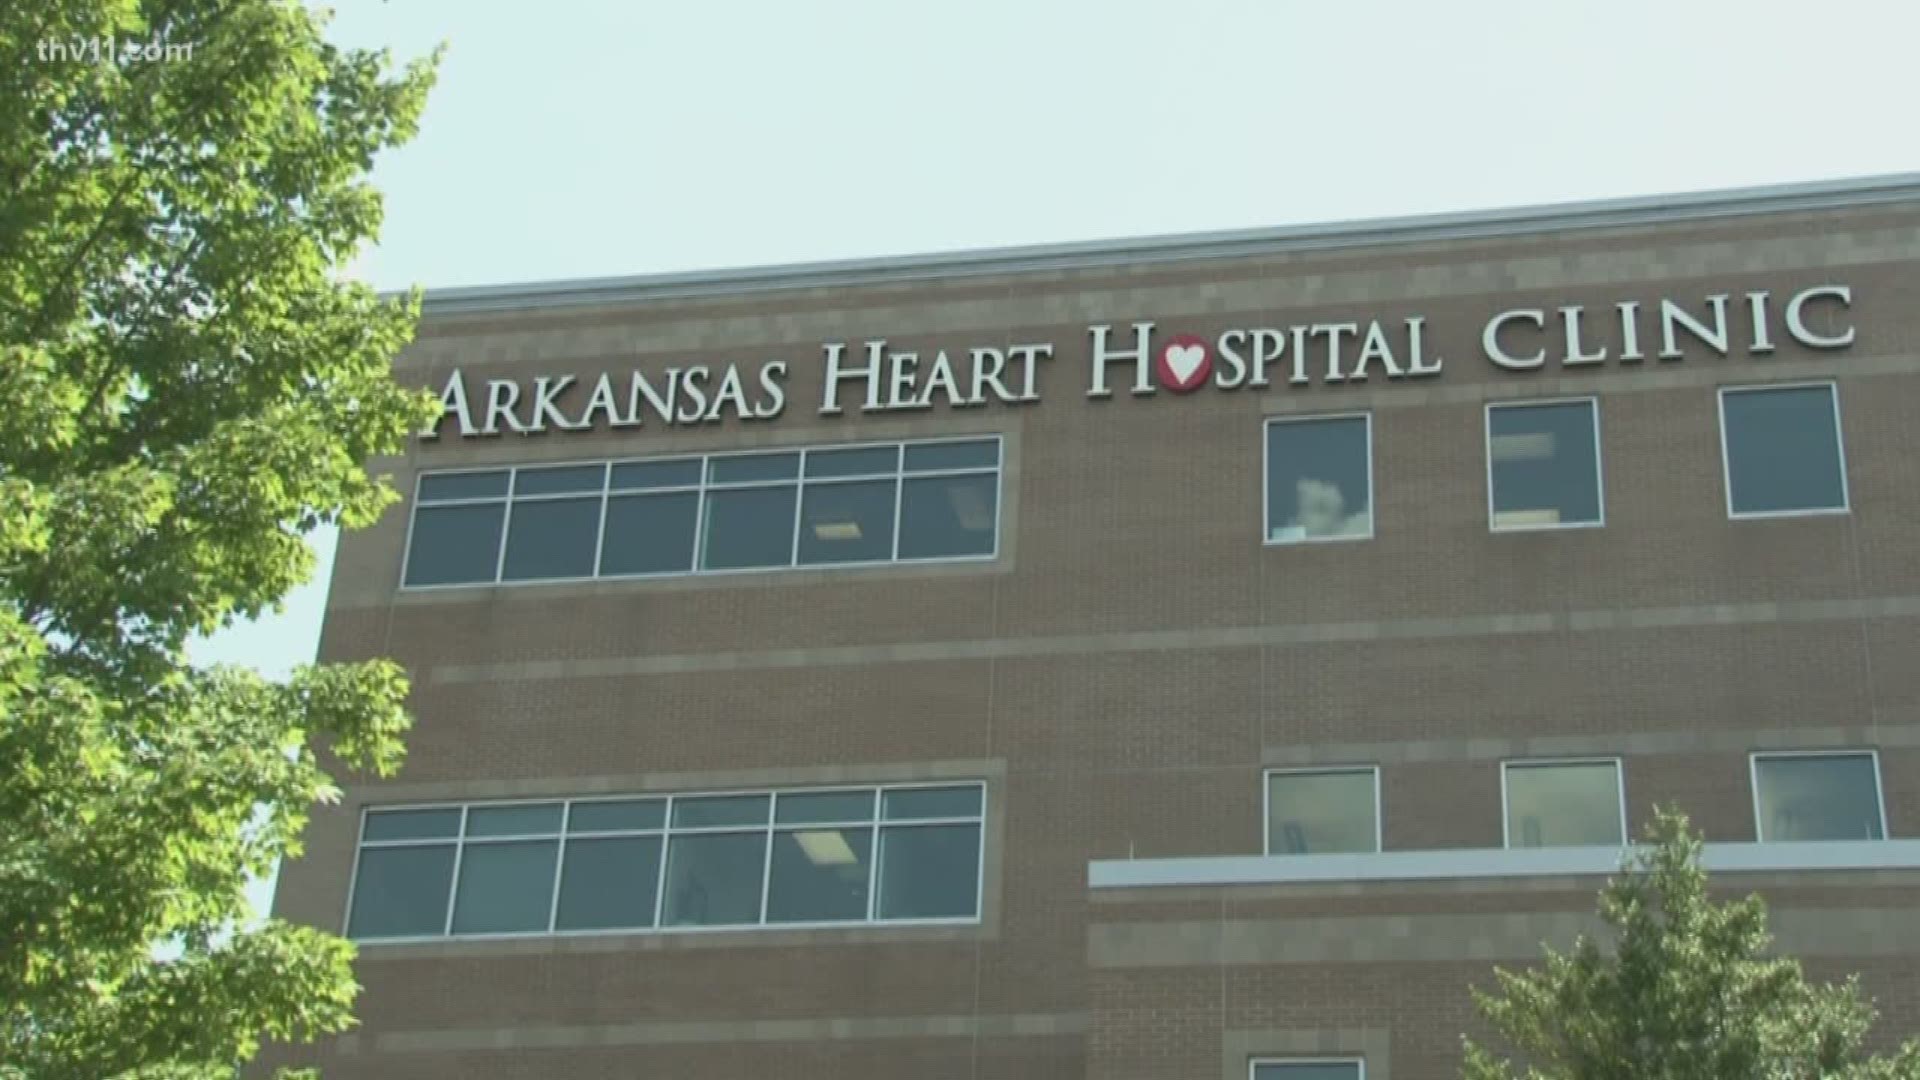 Arkansas Heart Hospital opened its own garden earlier this year.